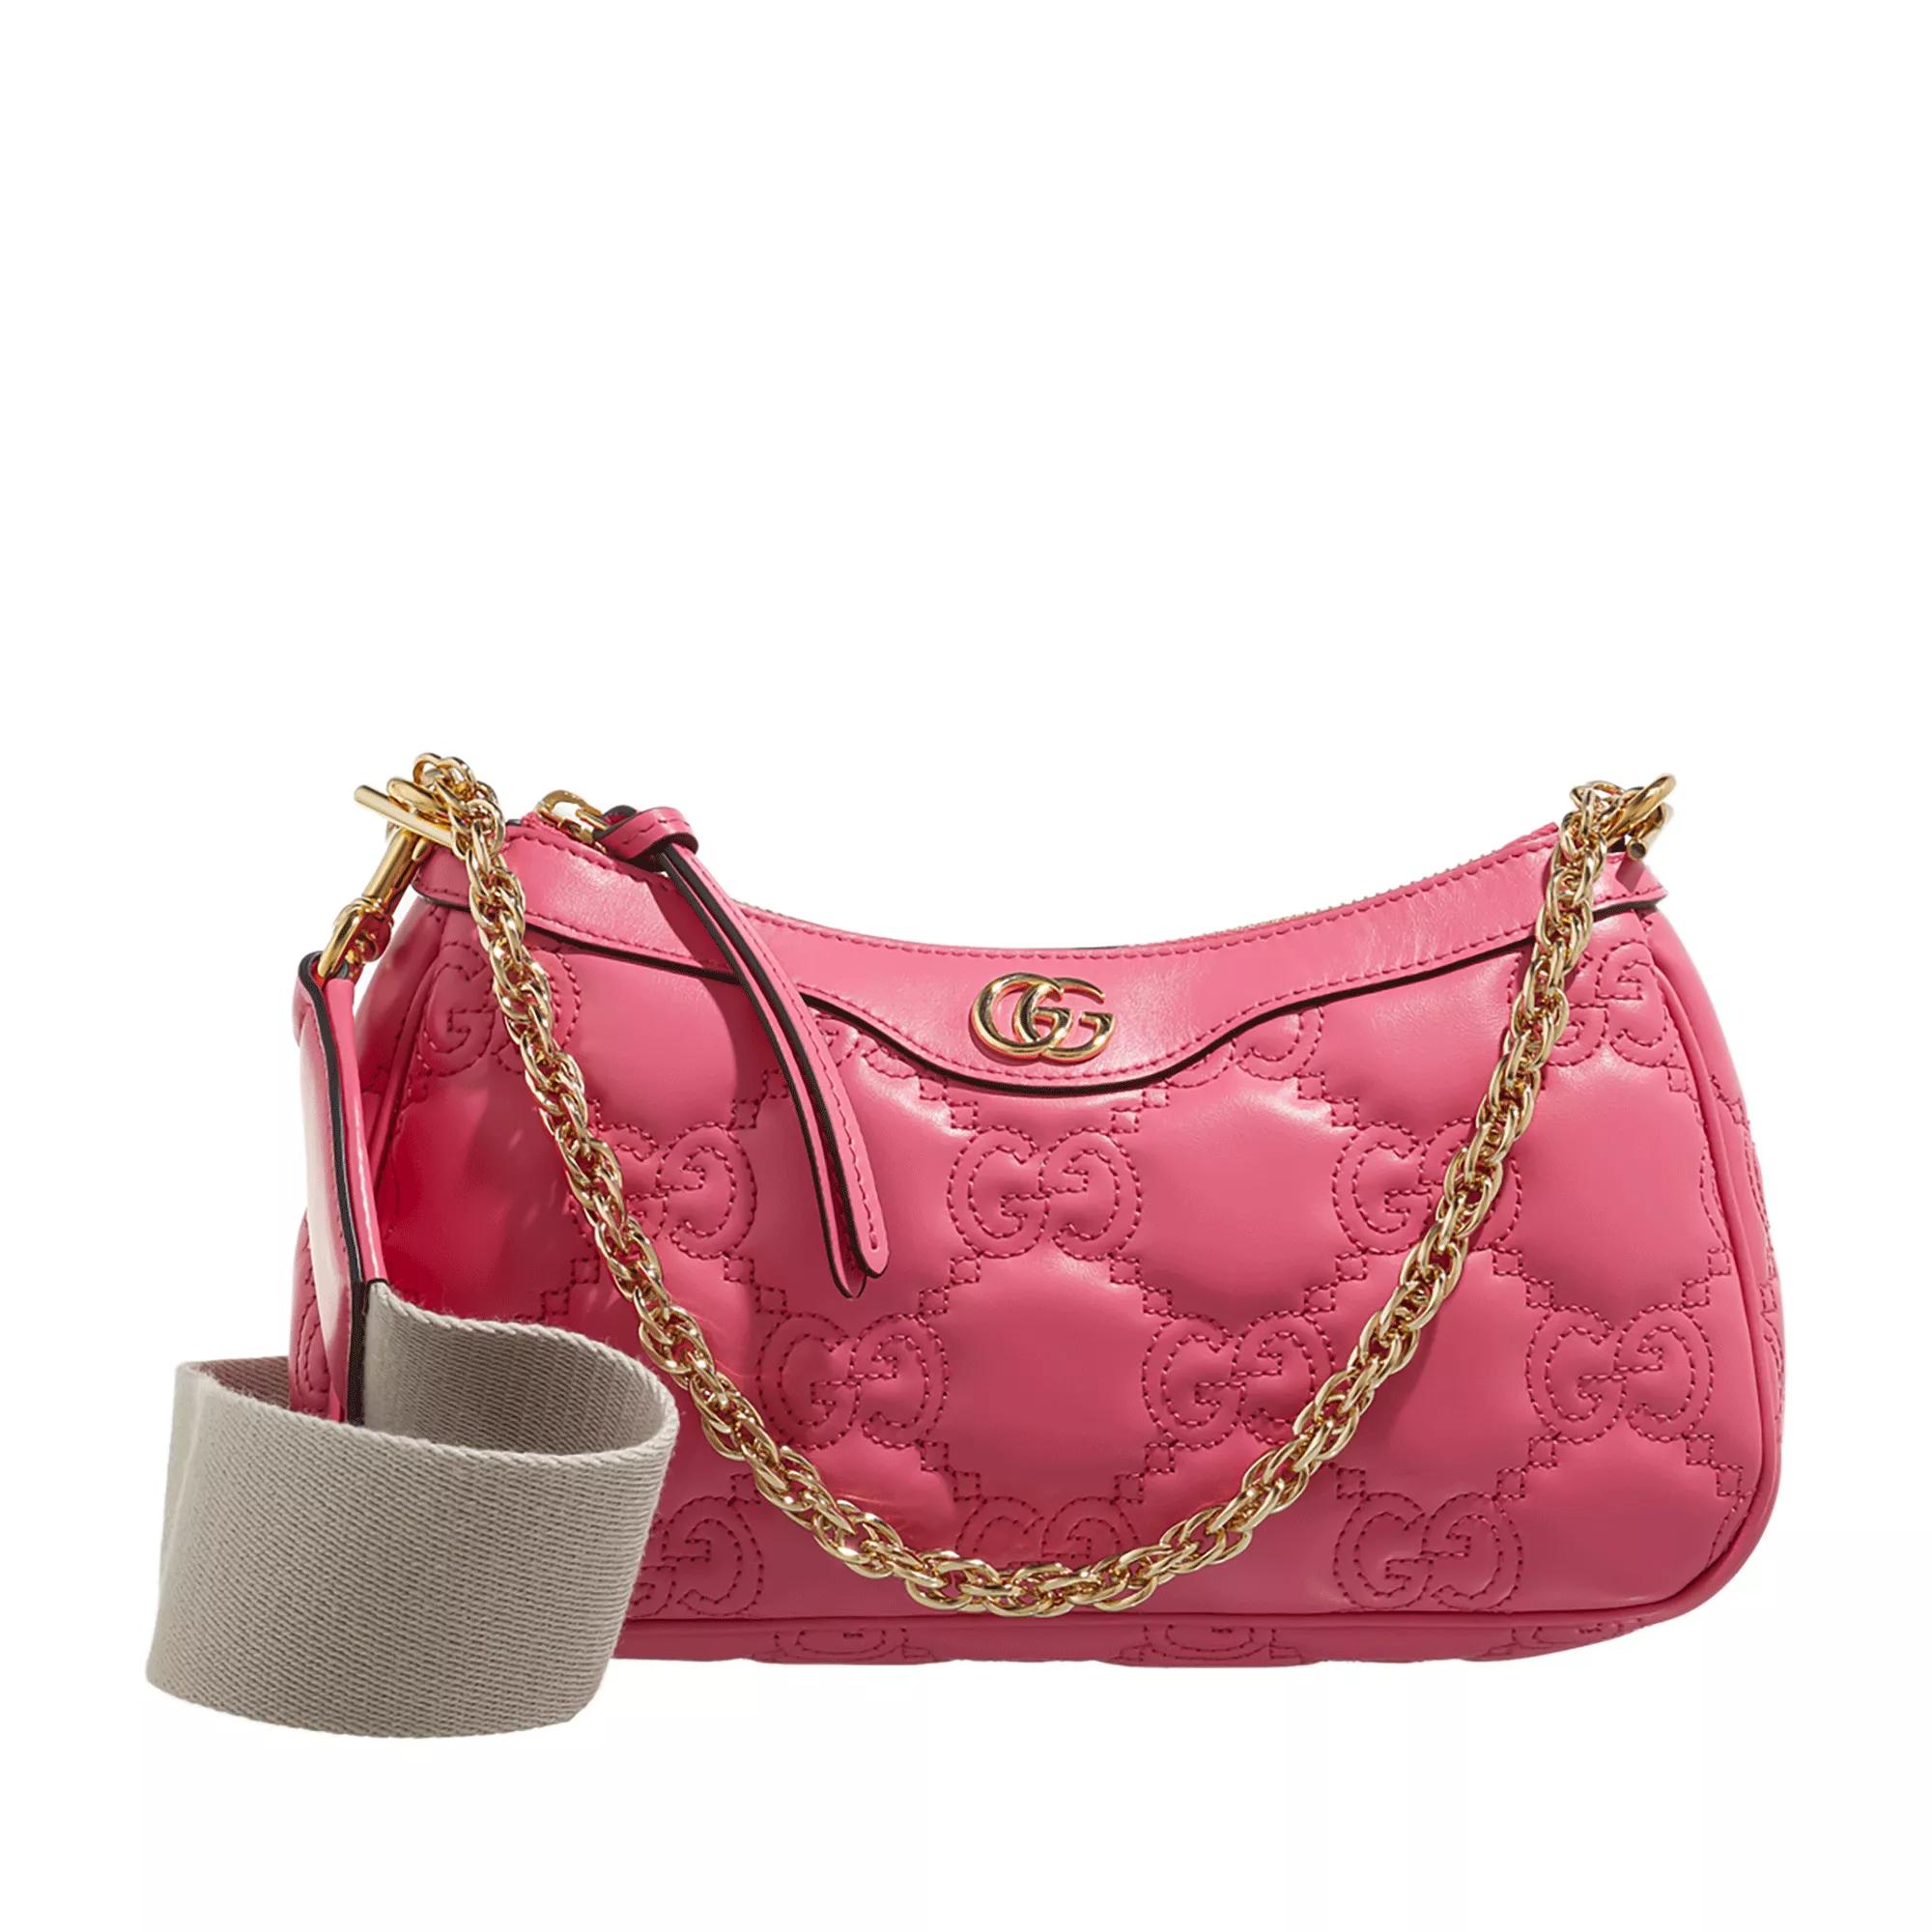 Gucci-GG-Marmont-Red-Heart-Leather-Shoulder-Bag